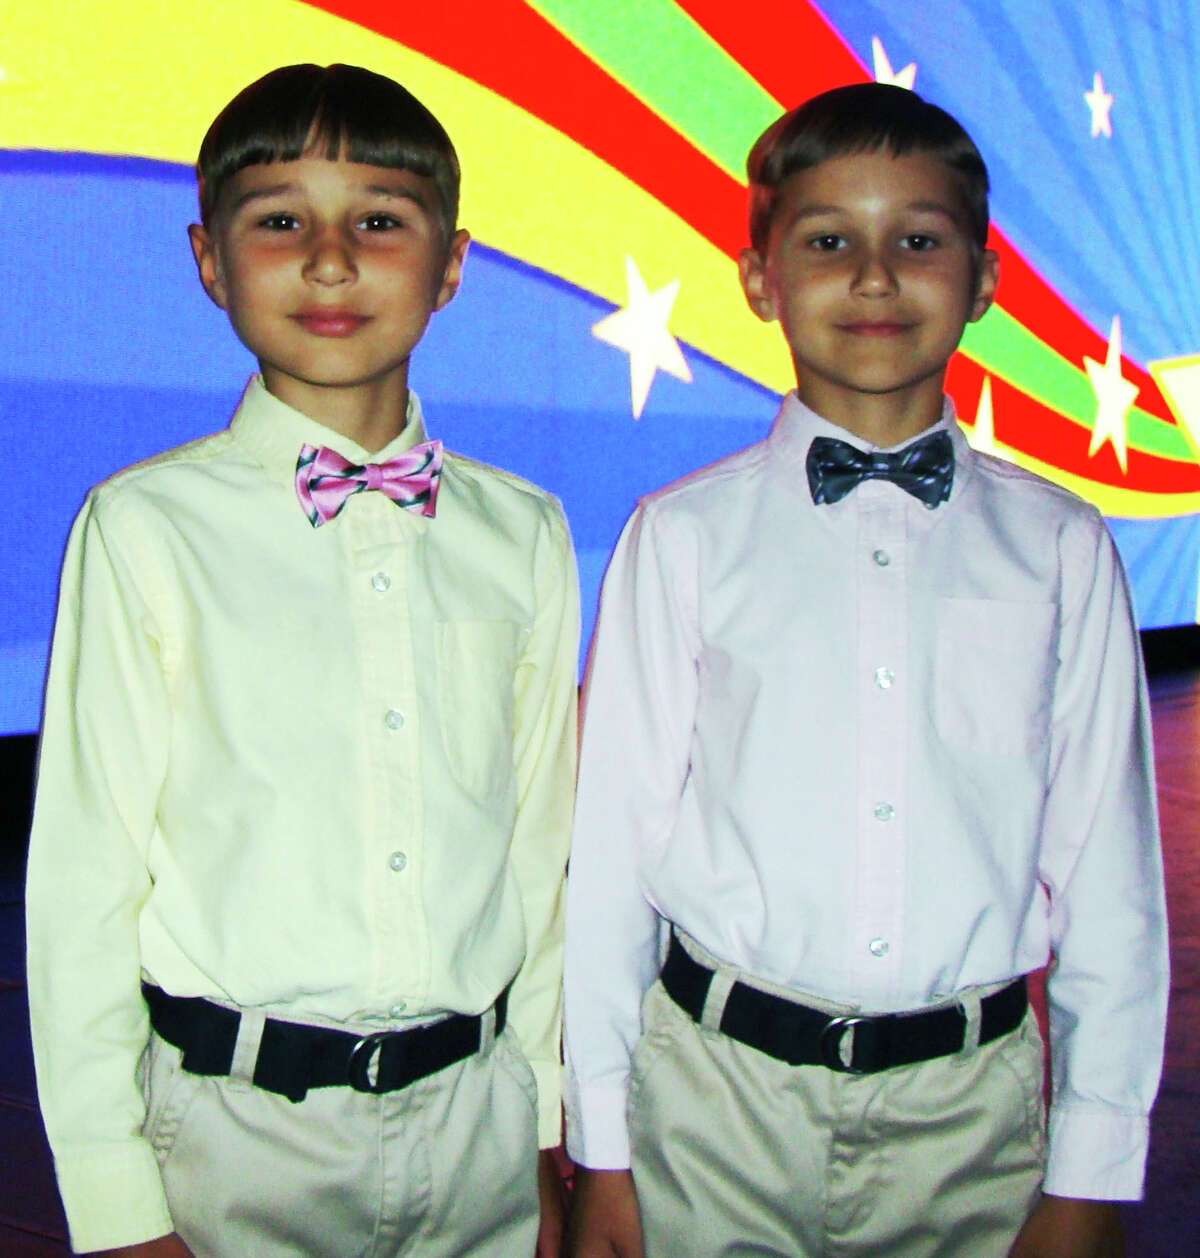 Brothers Ivan, 7, left, and Alex Kalamikov, 5, of New Milford, formerly of Staten Island, N.Y. 2014